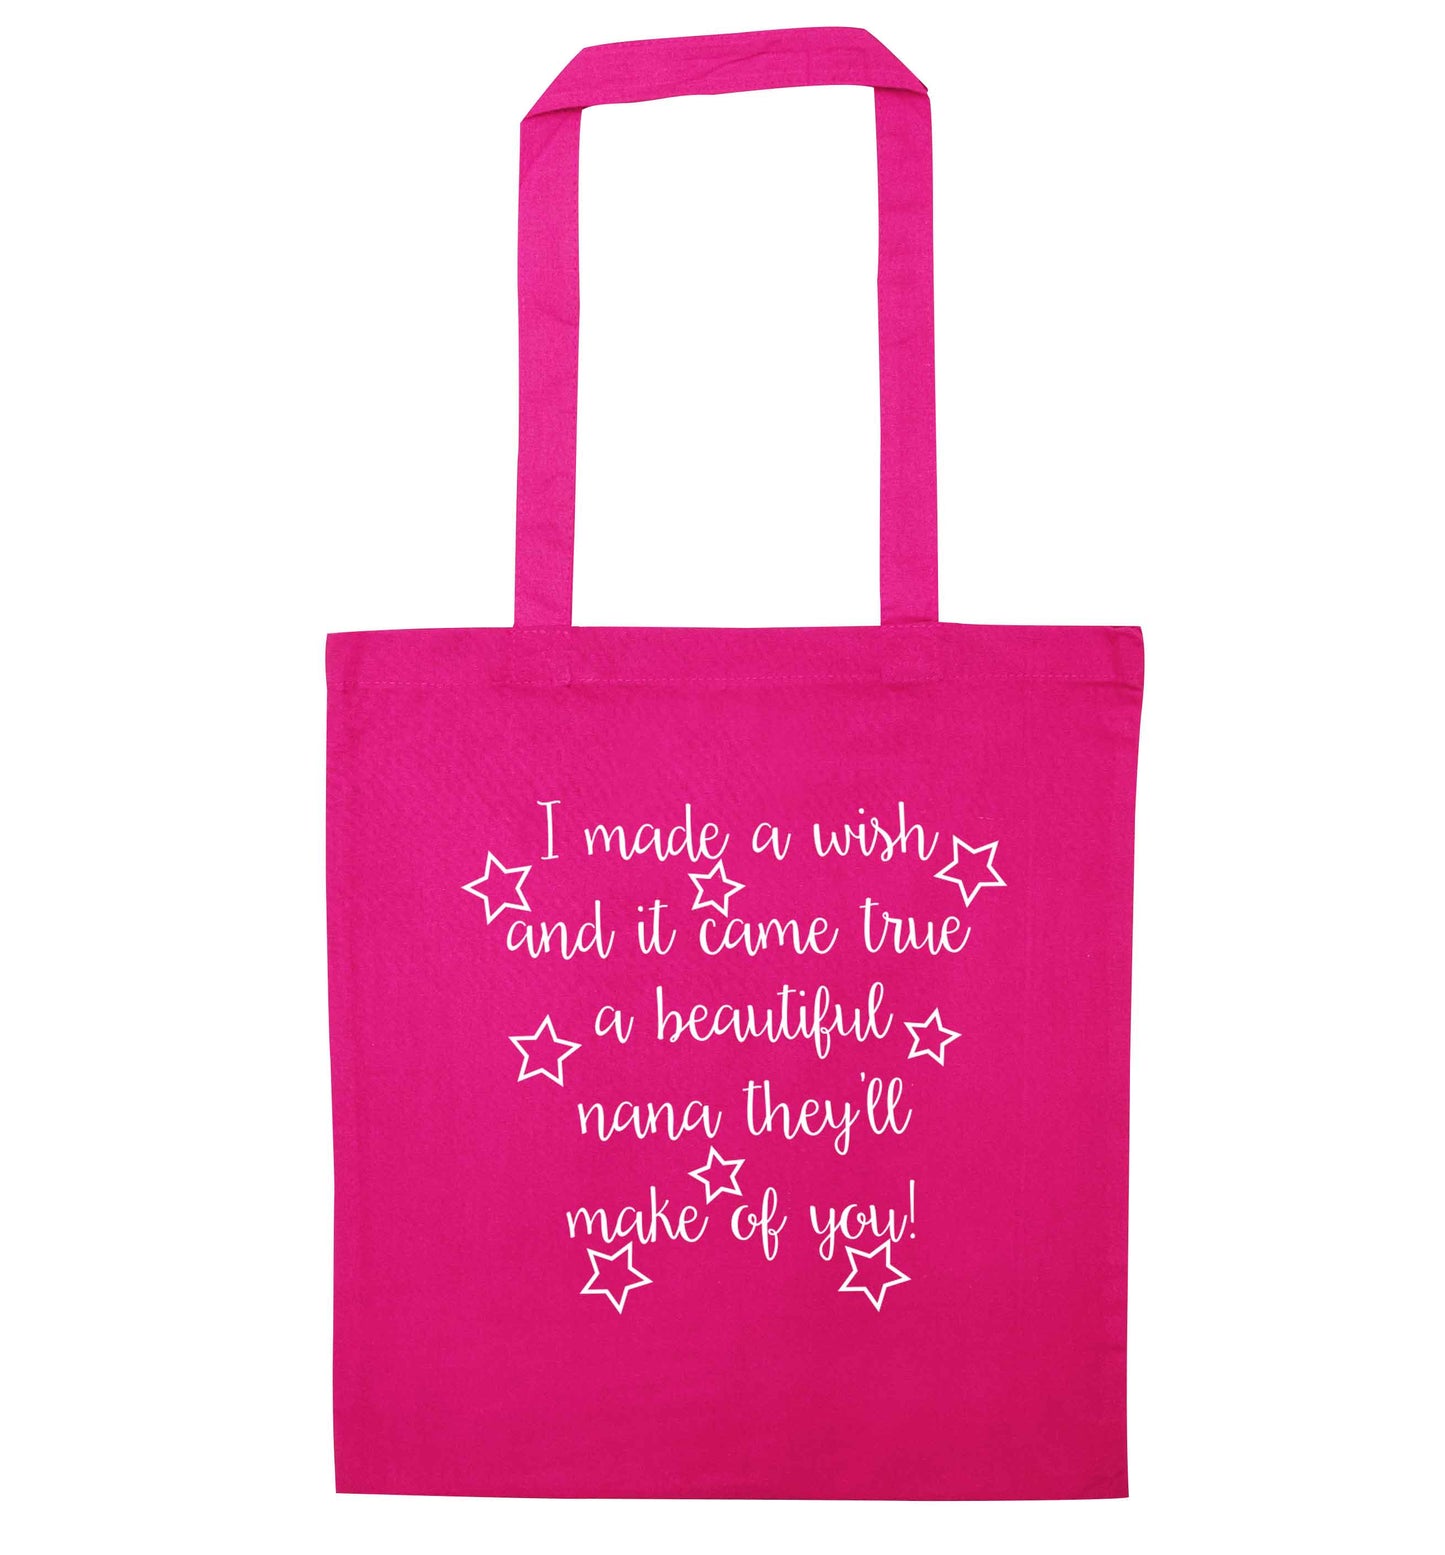 I made a wish and it came true a beautiful nana they'll make of you! pink tote bag